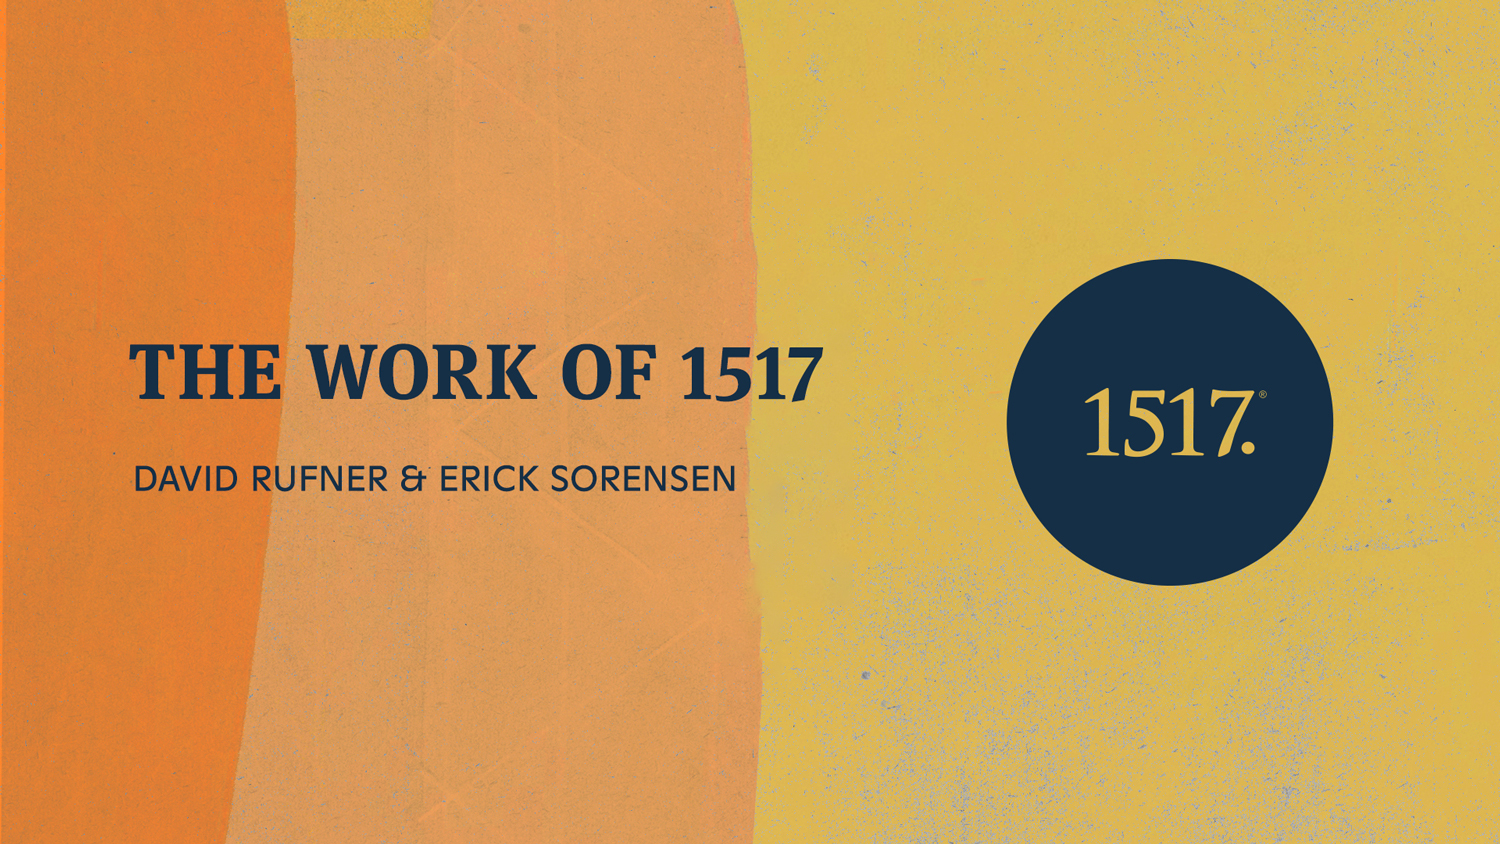 The Work of 1517